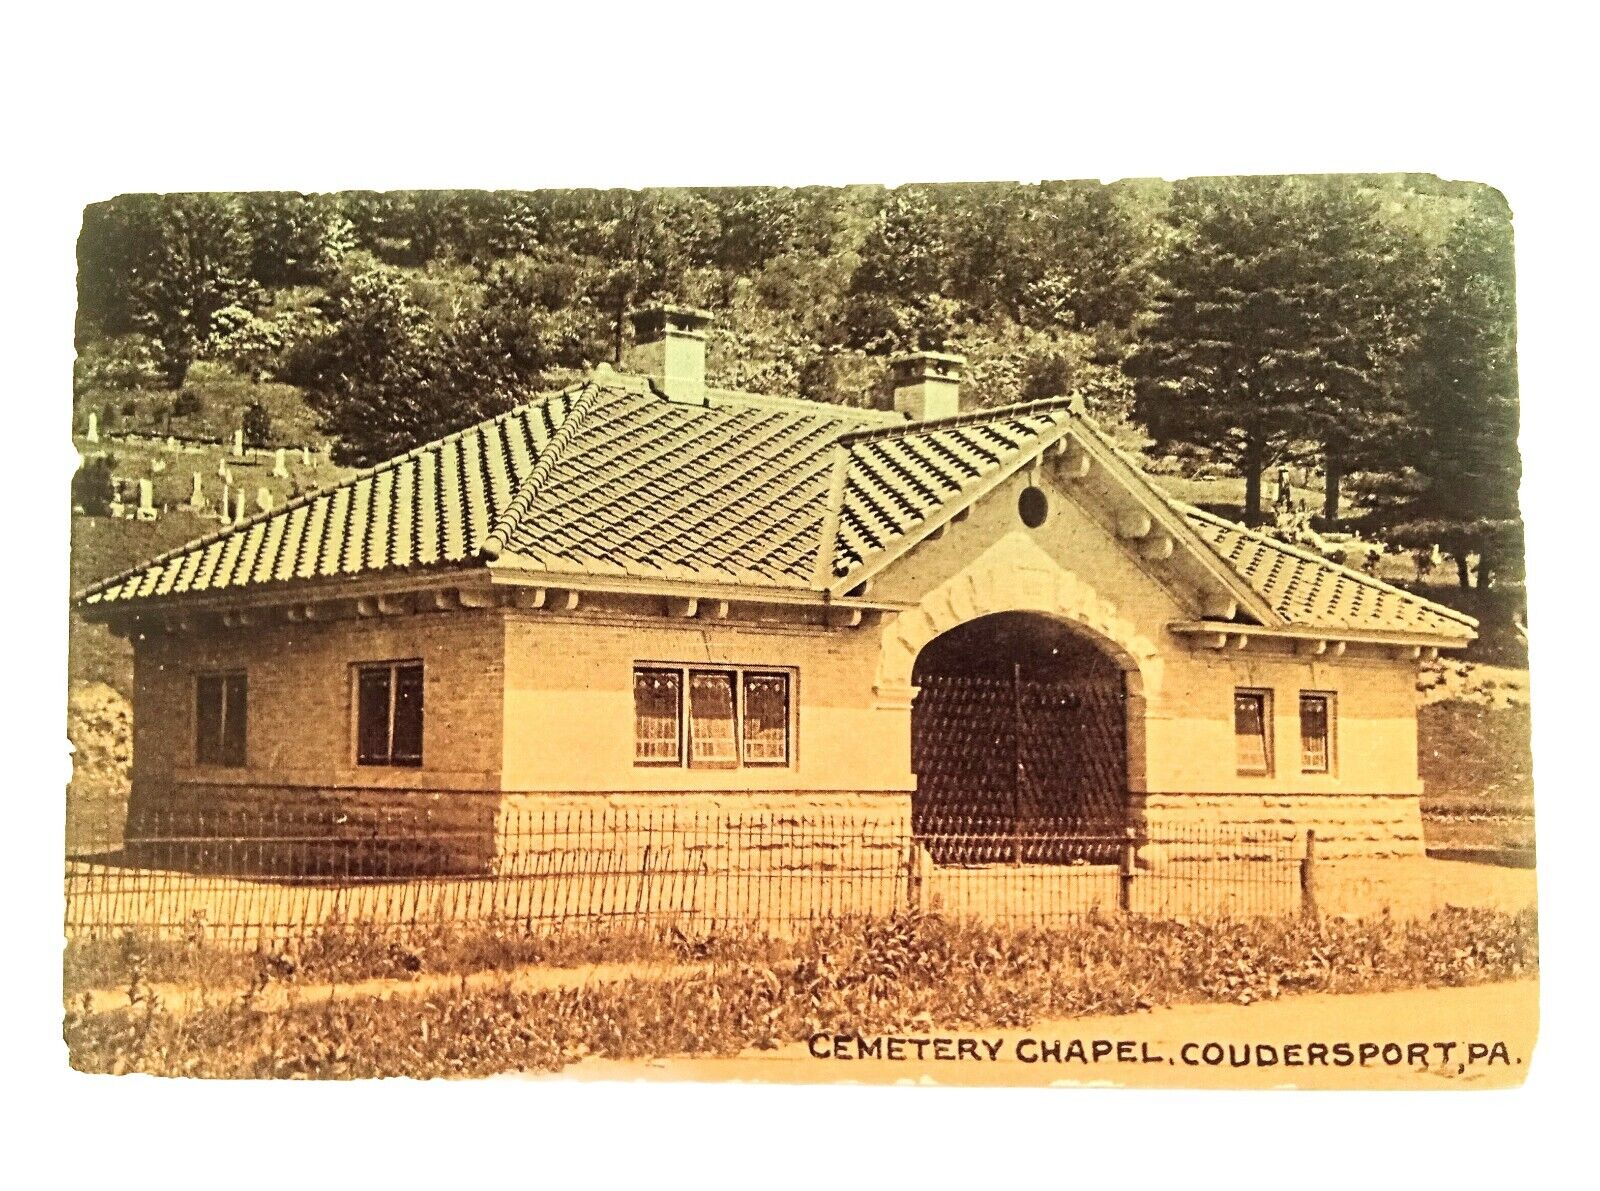 Cemetery Chapel, Coudersport PA by Galeton Wellsboro Antique Postcard